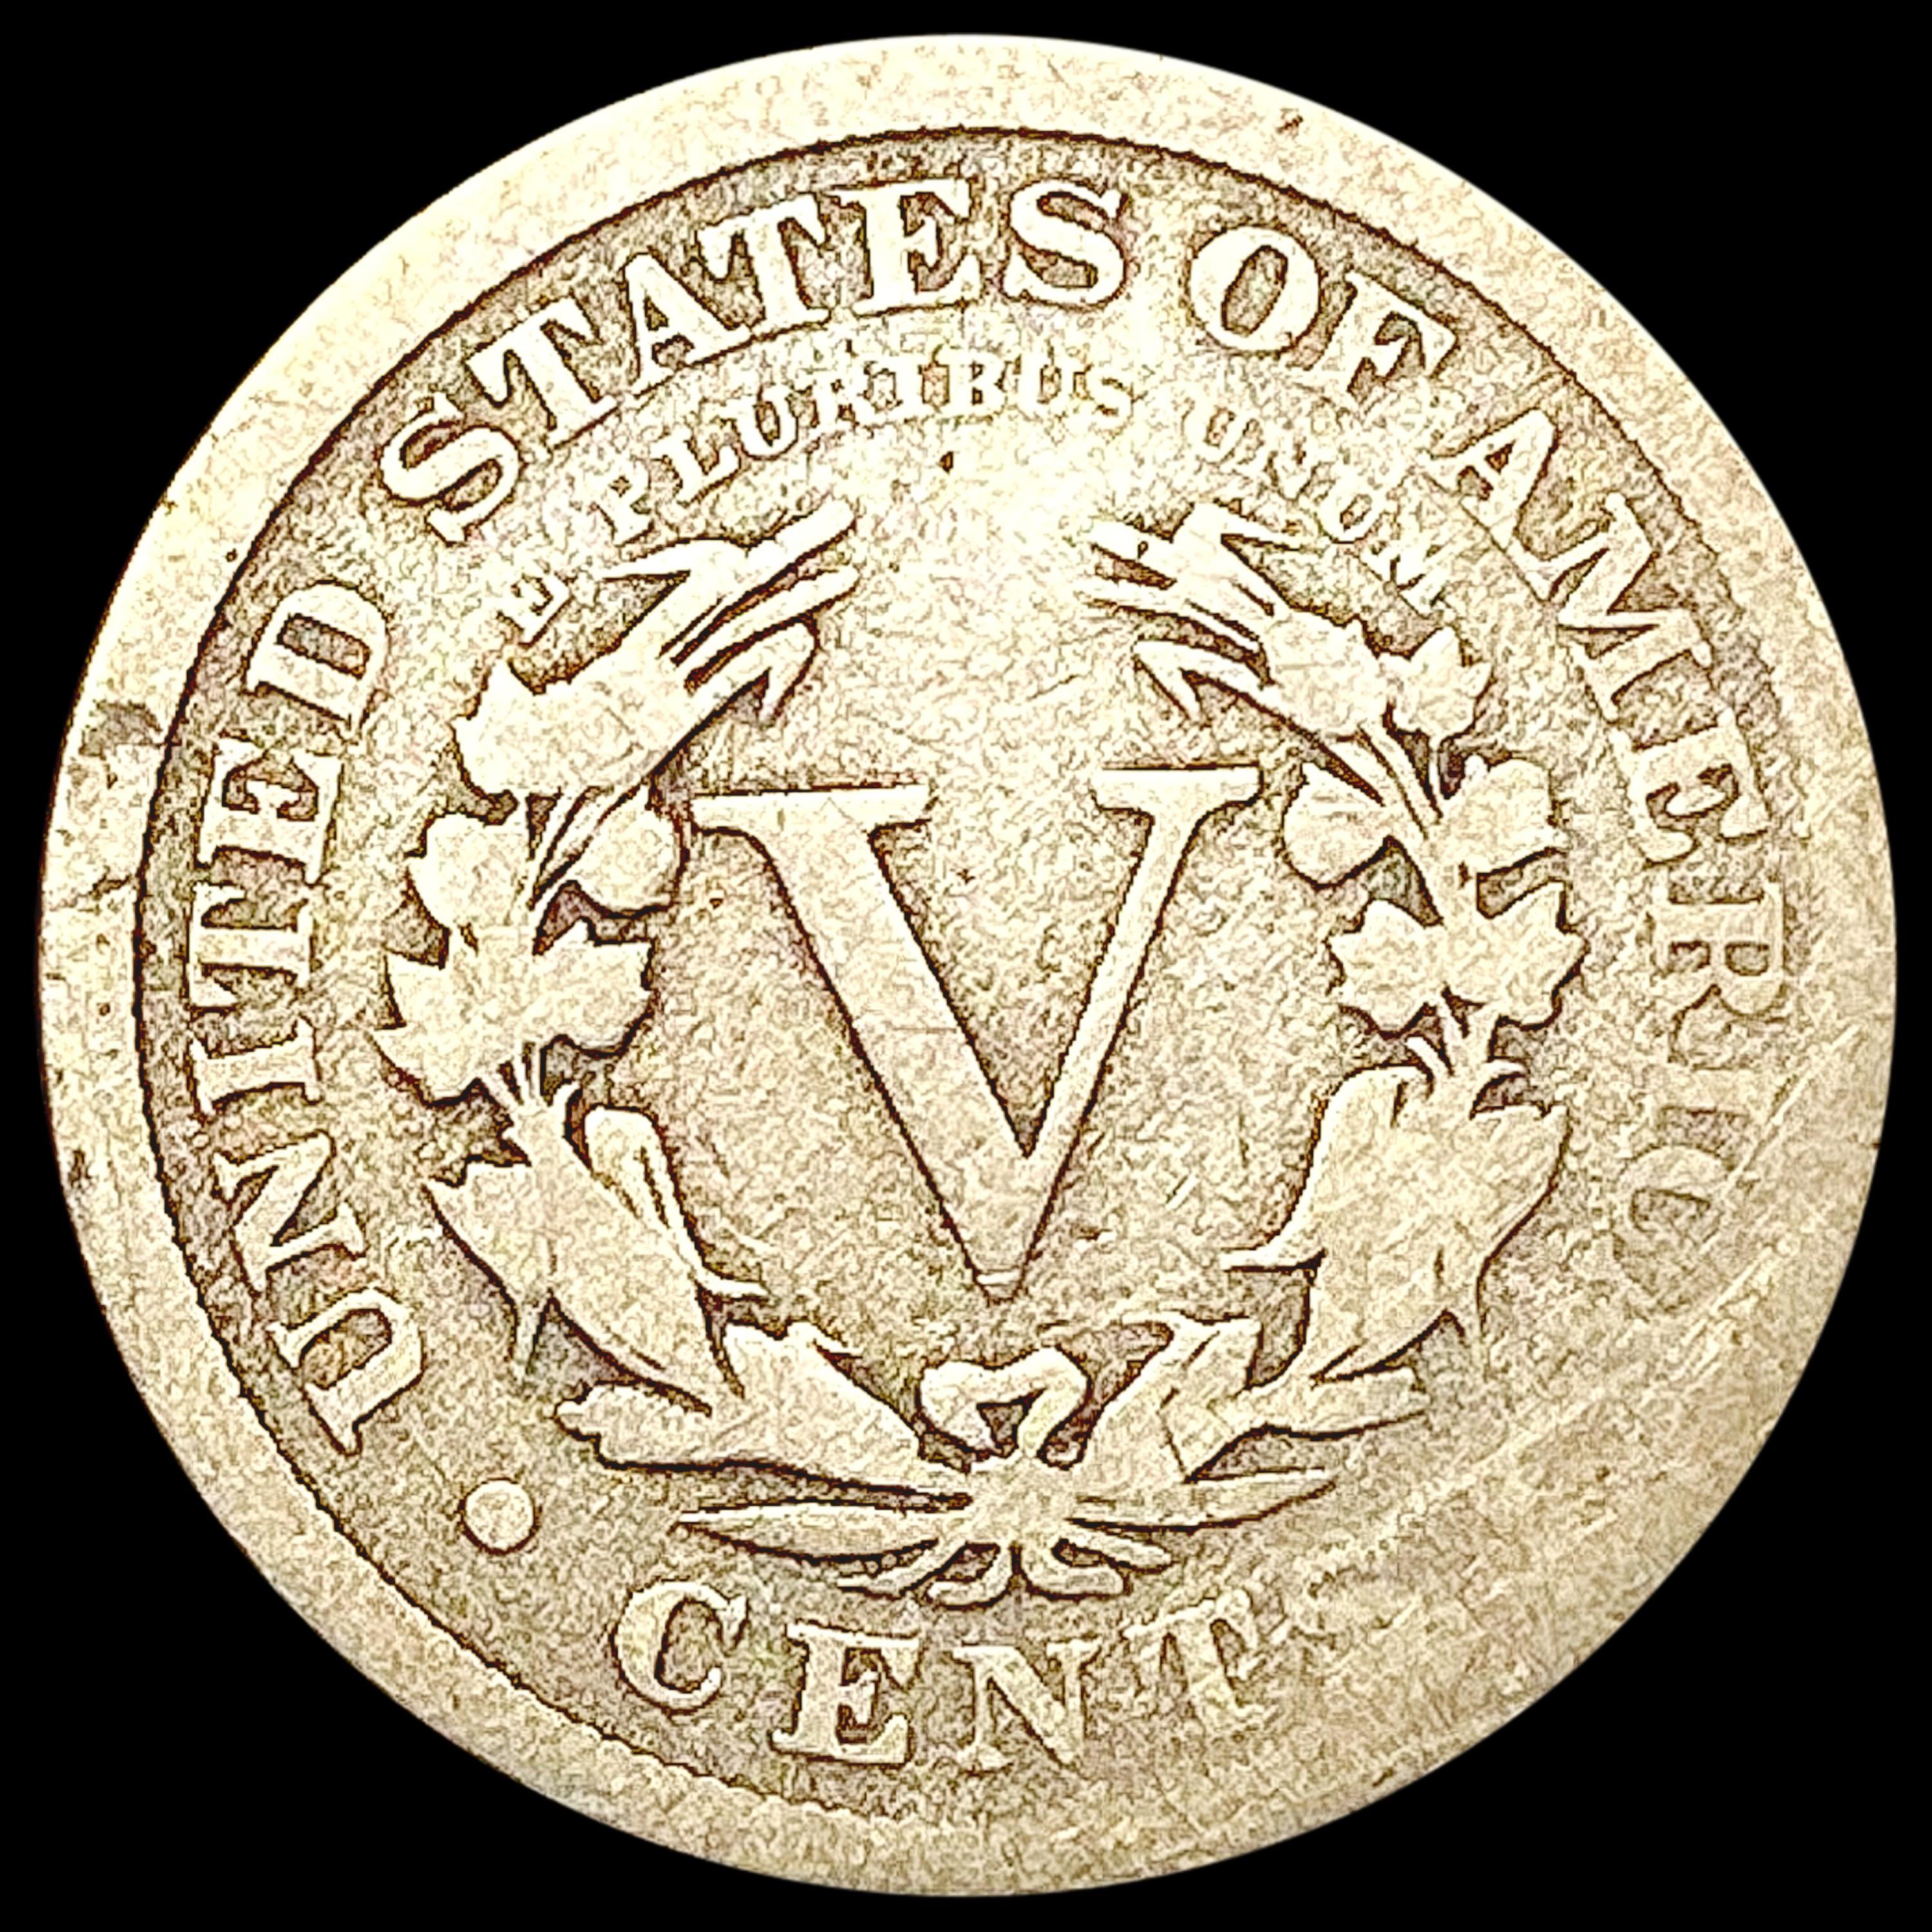 1886 Liberty Victory Nickel NICELY CIRCULATED